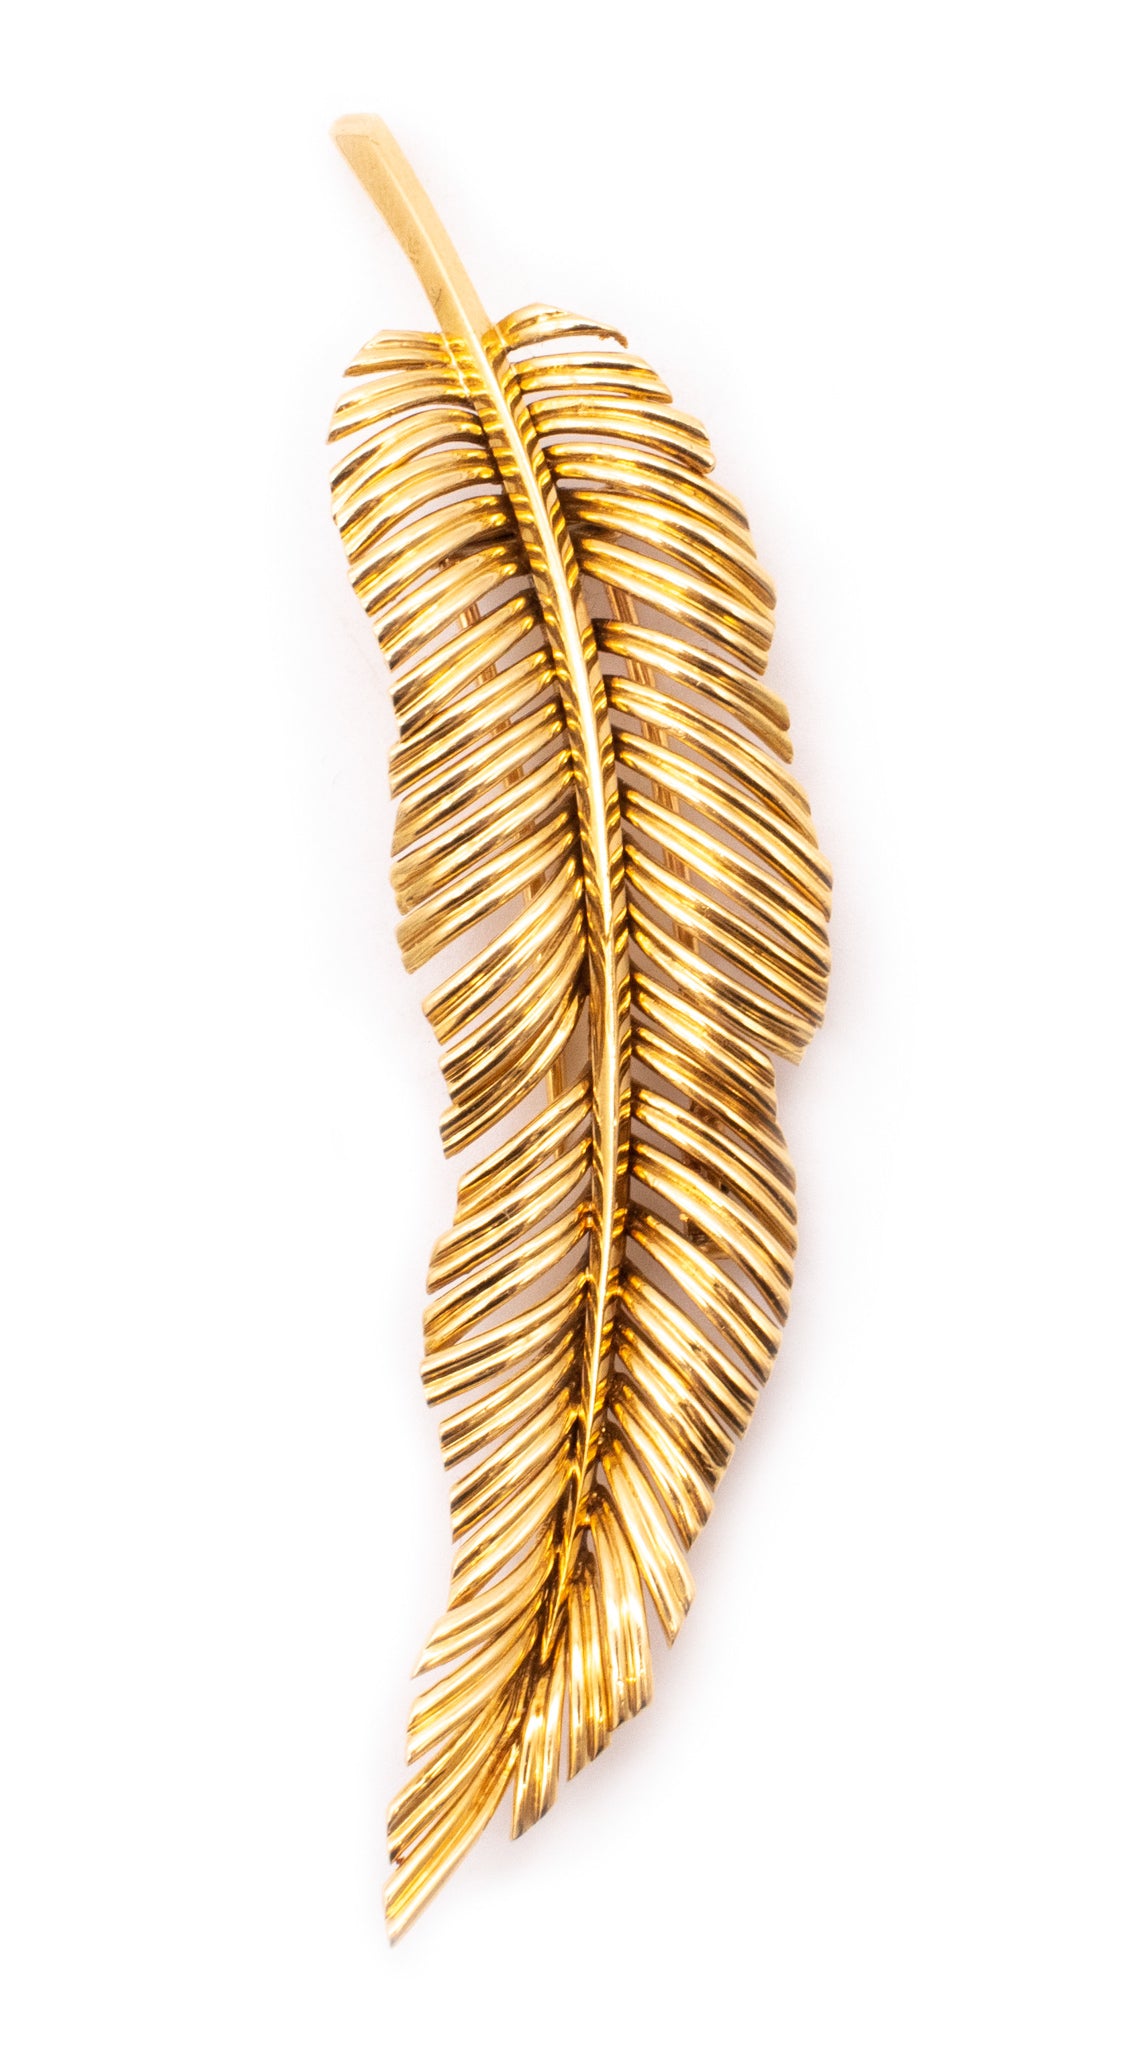 *Van Cleef & Arpels 1960 Paris large feather brooch in solid 18 kt yellow gold